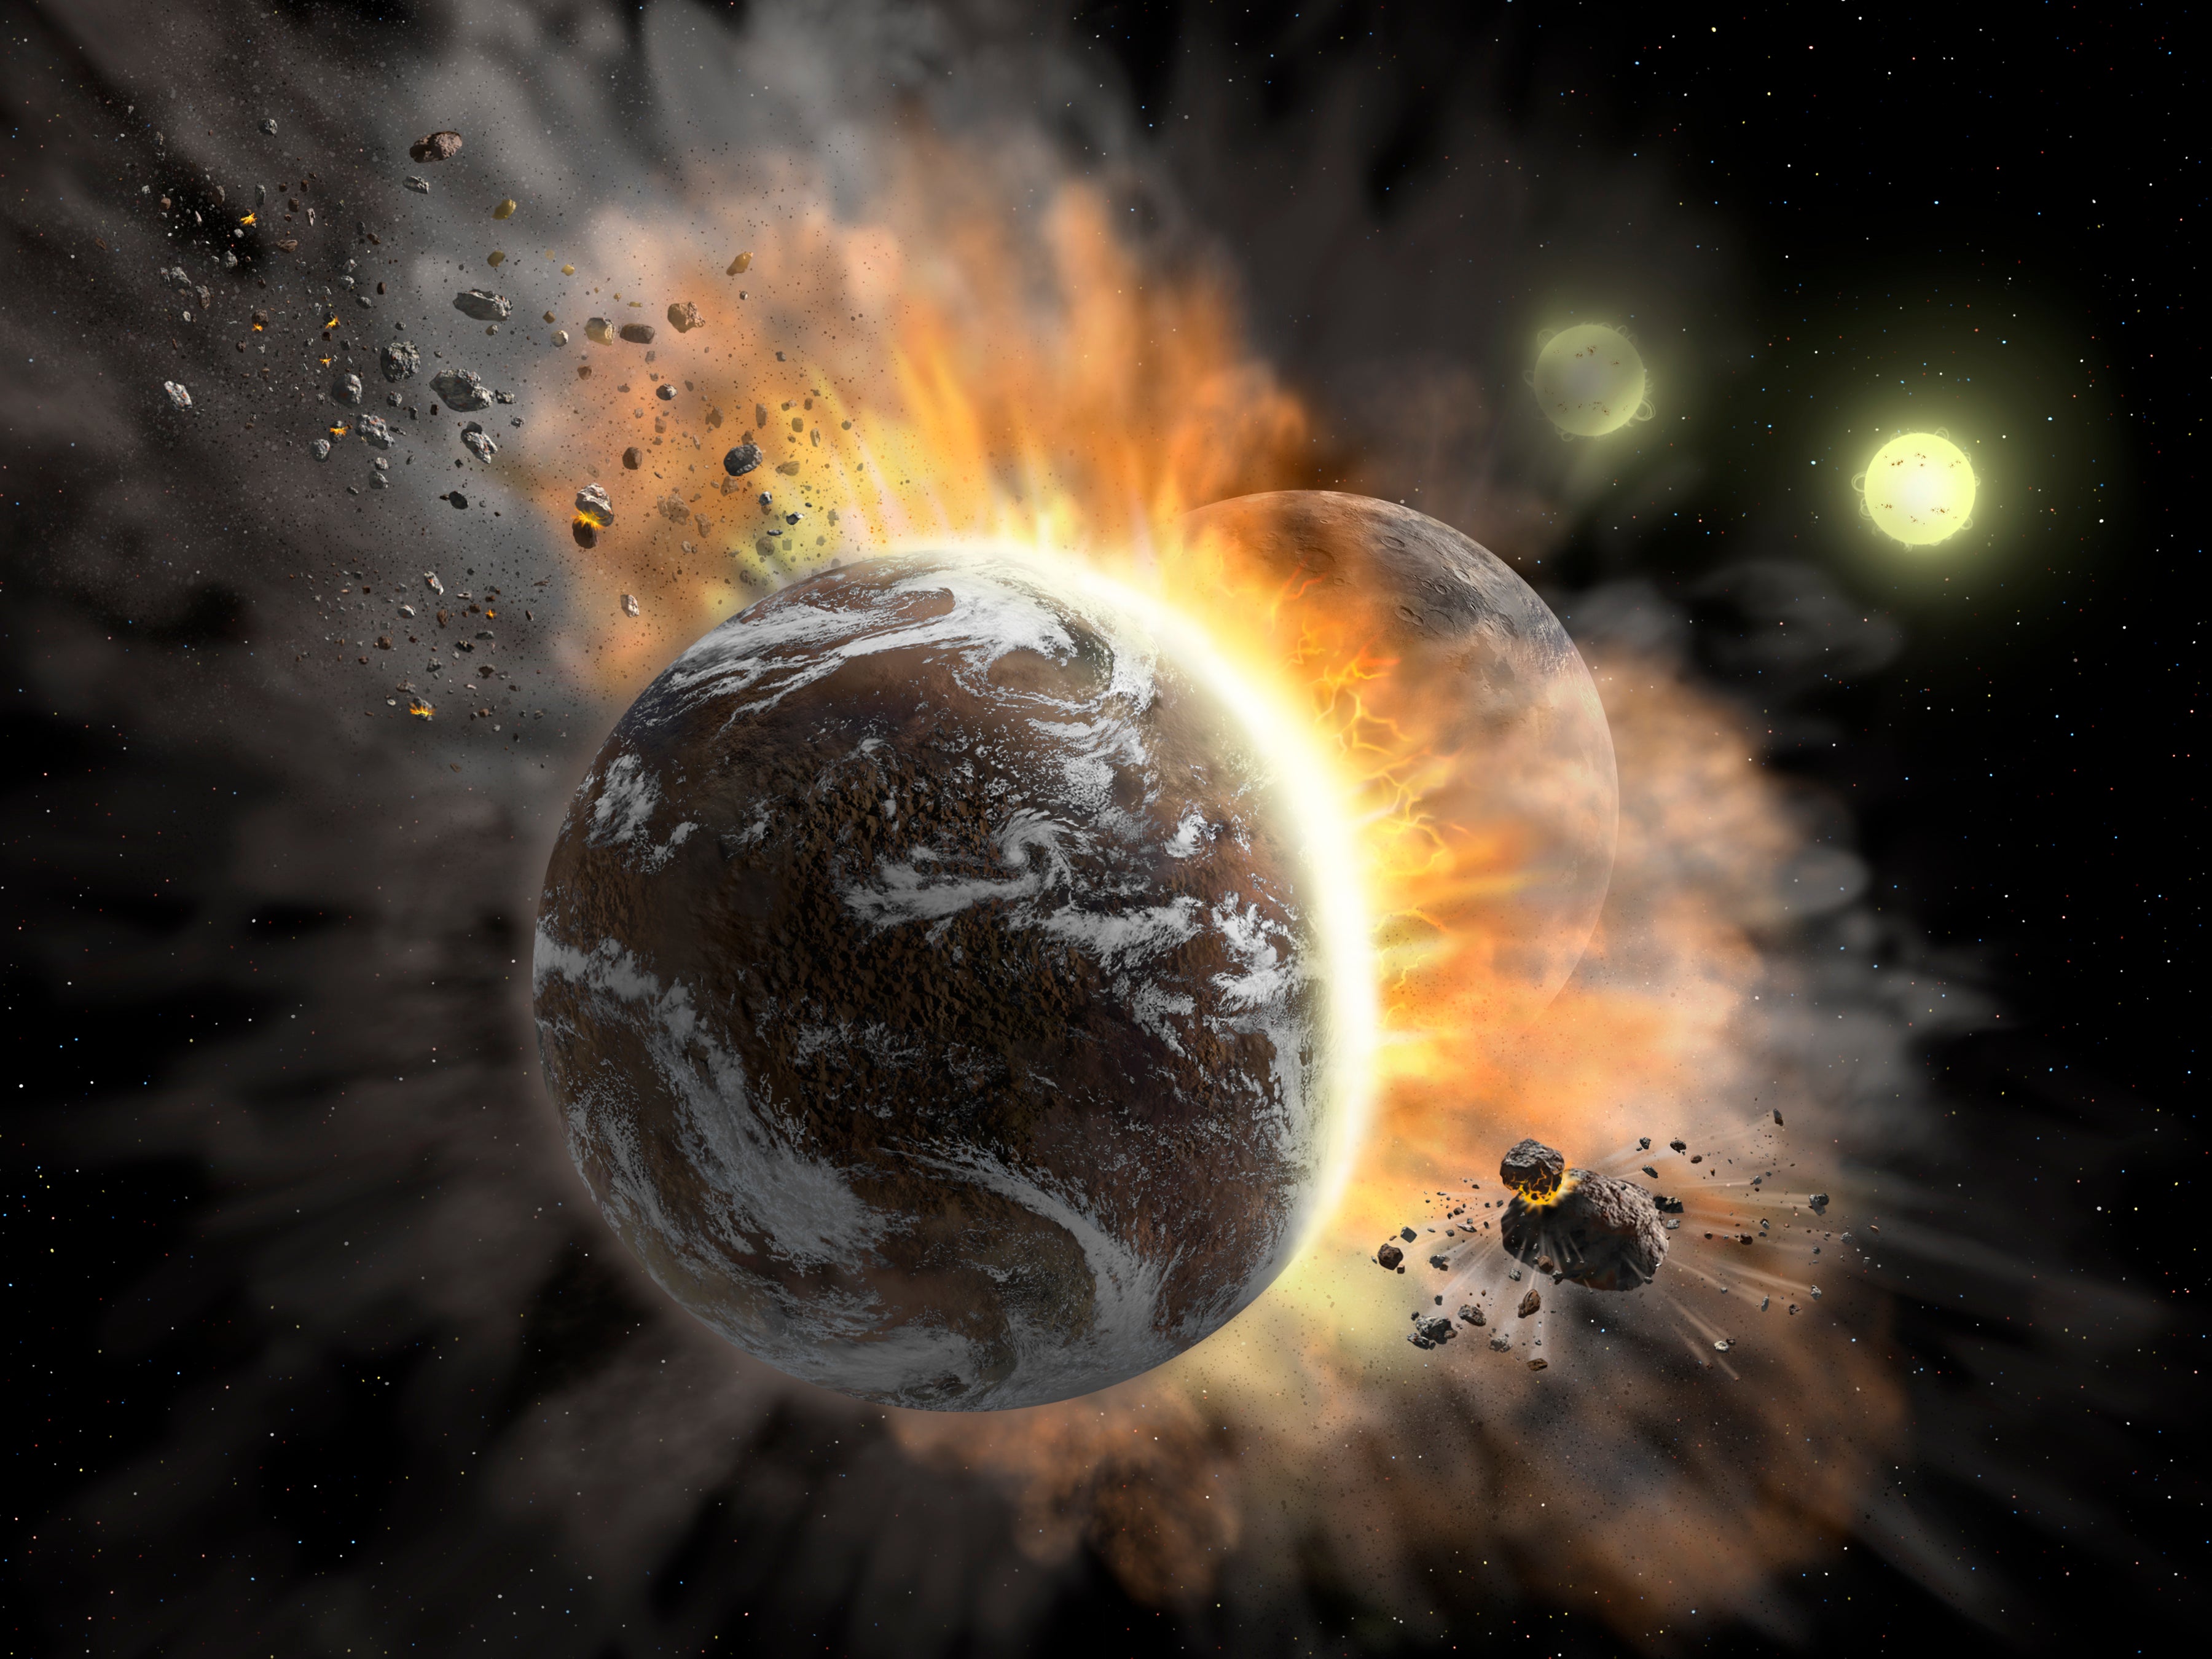 Artist's conception of a catastrophic collision betweeen two exoplanets.  (Illustration: NASA/SOFIA/Lynette Cook)